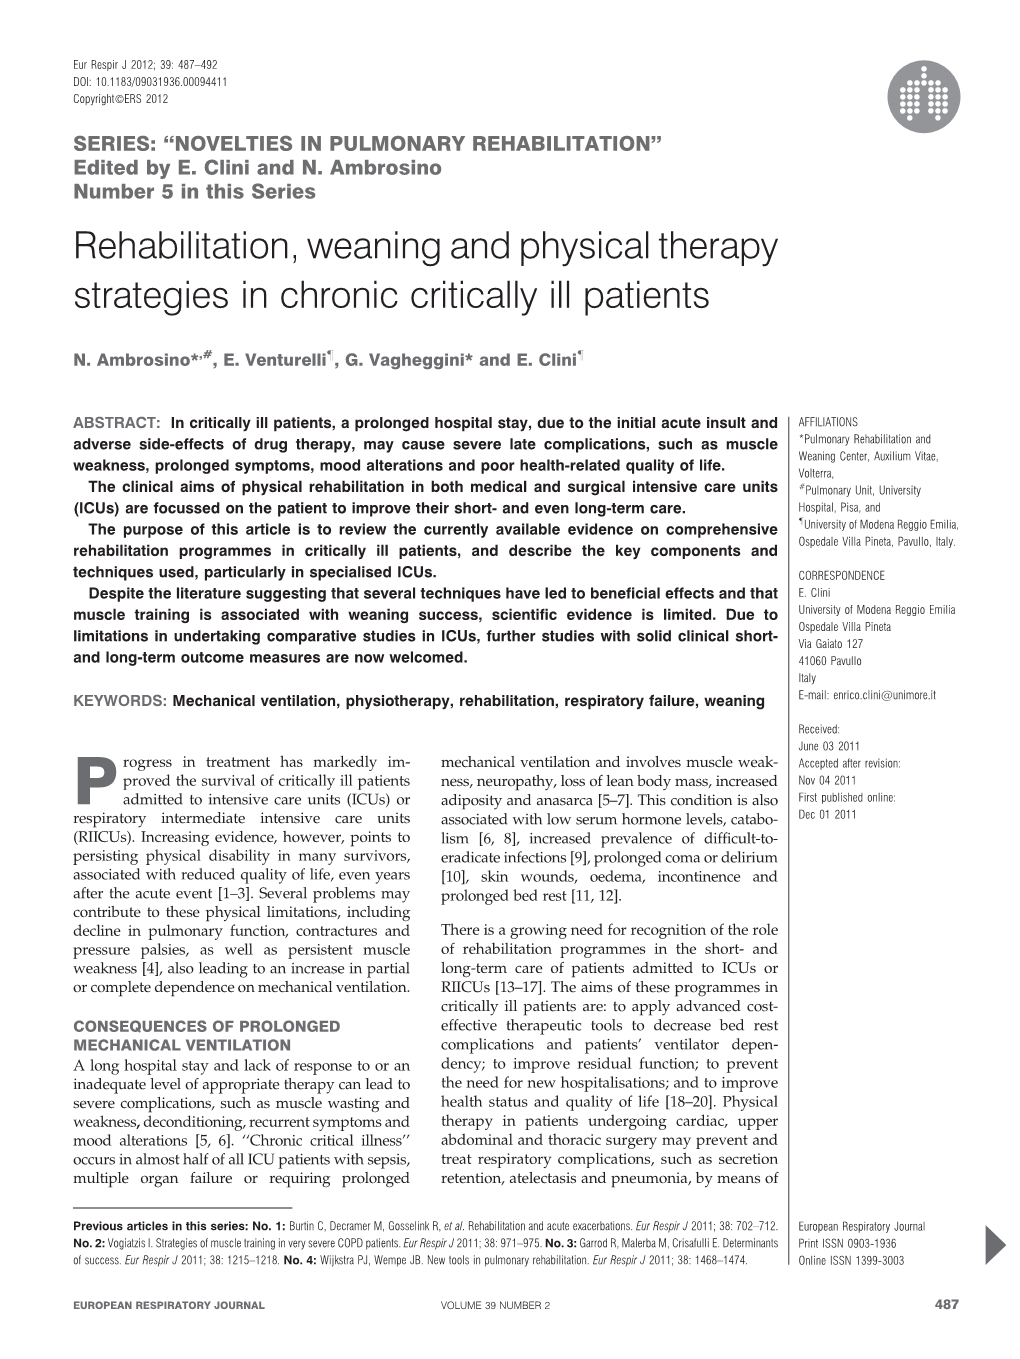 Rehabilitation, Weaning and Physical Therapy Strategies in Chronic Critically Ill Patients